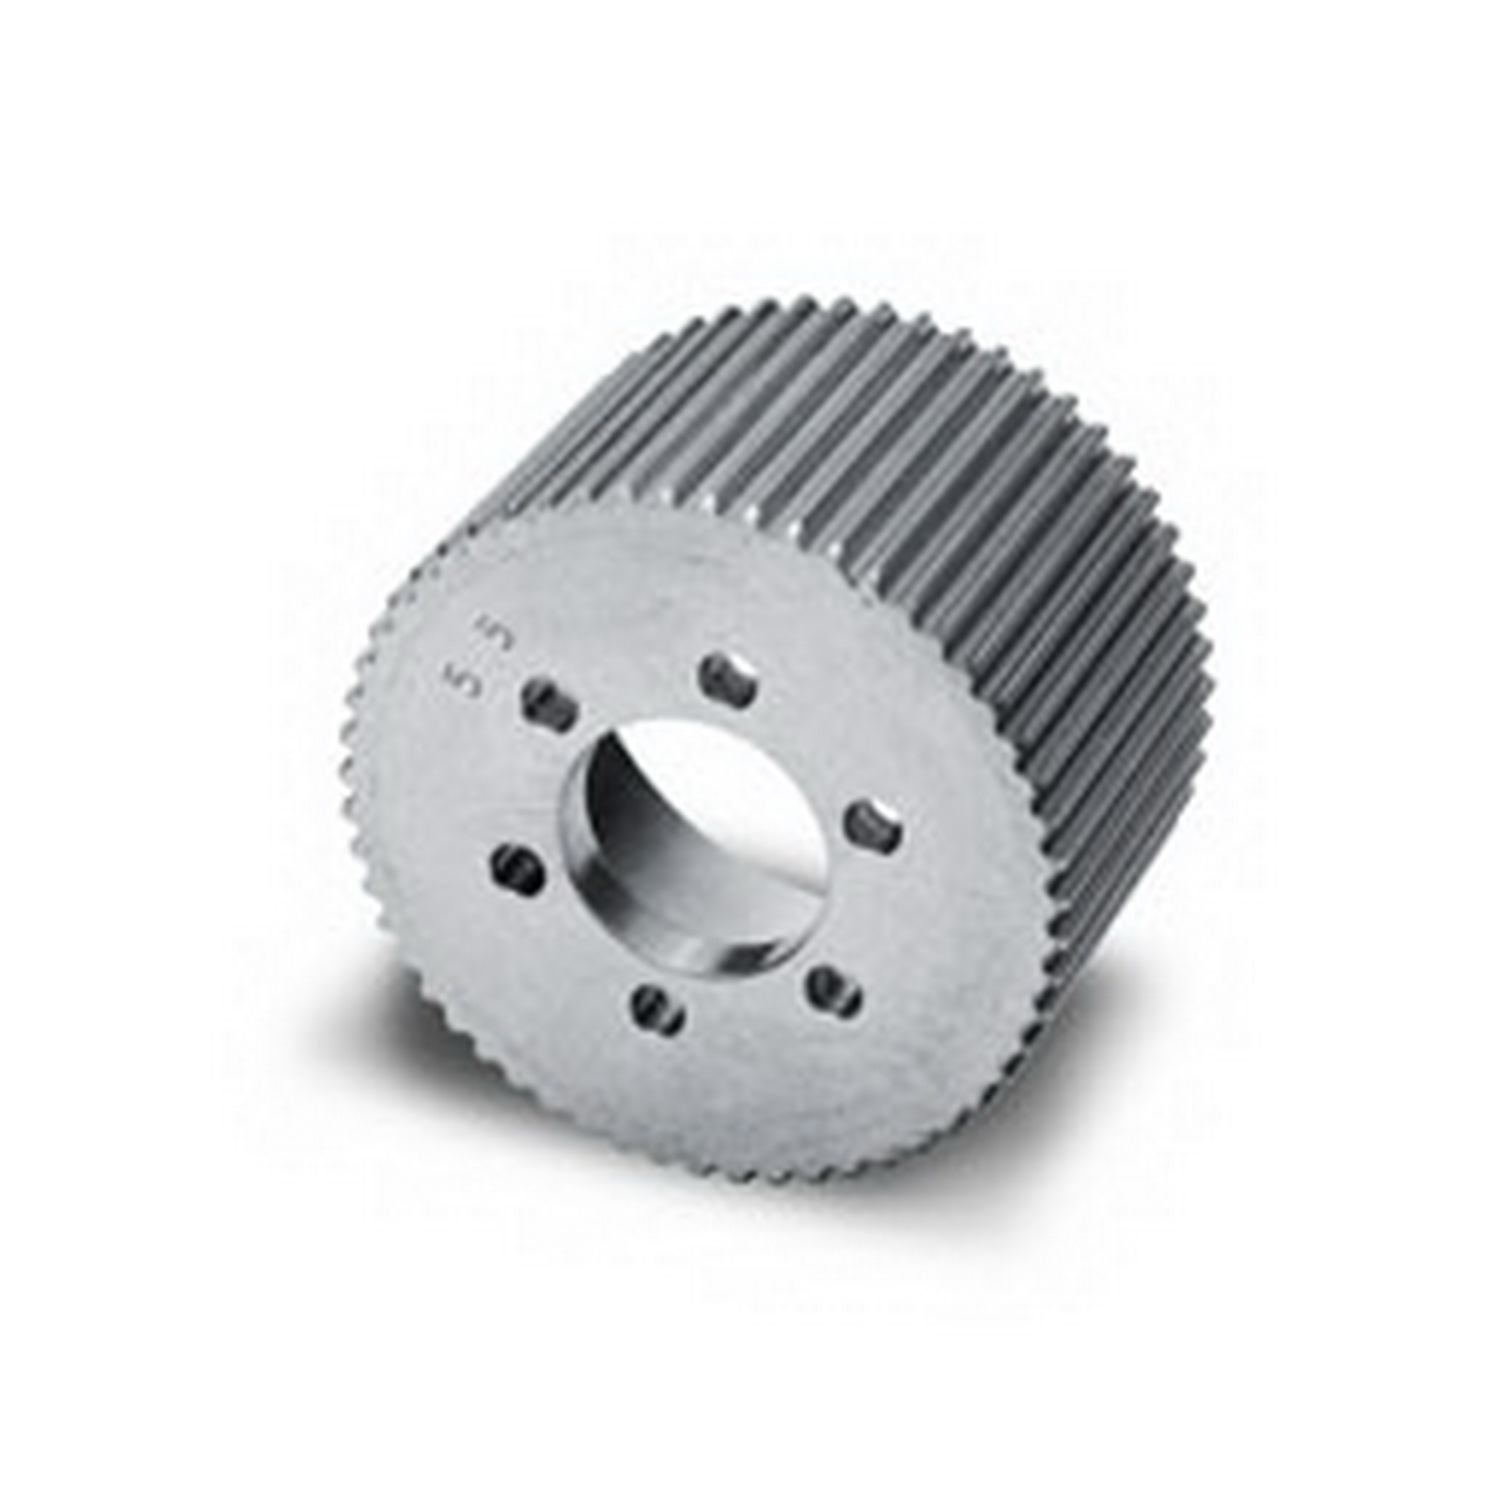 Weiand Weiand 7109-57 8mm Pitch Drive Pulley